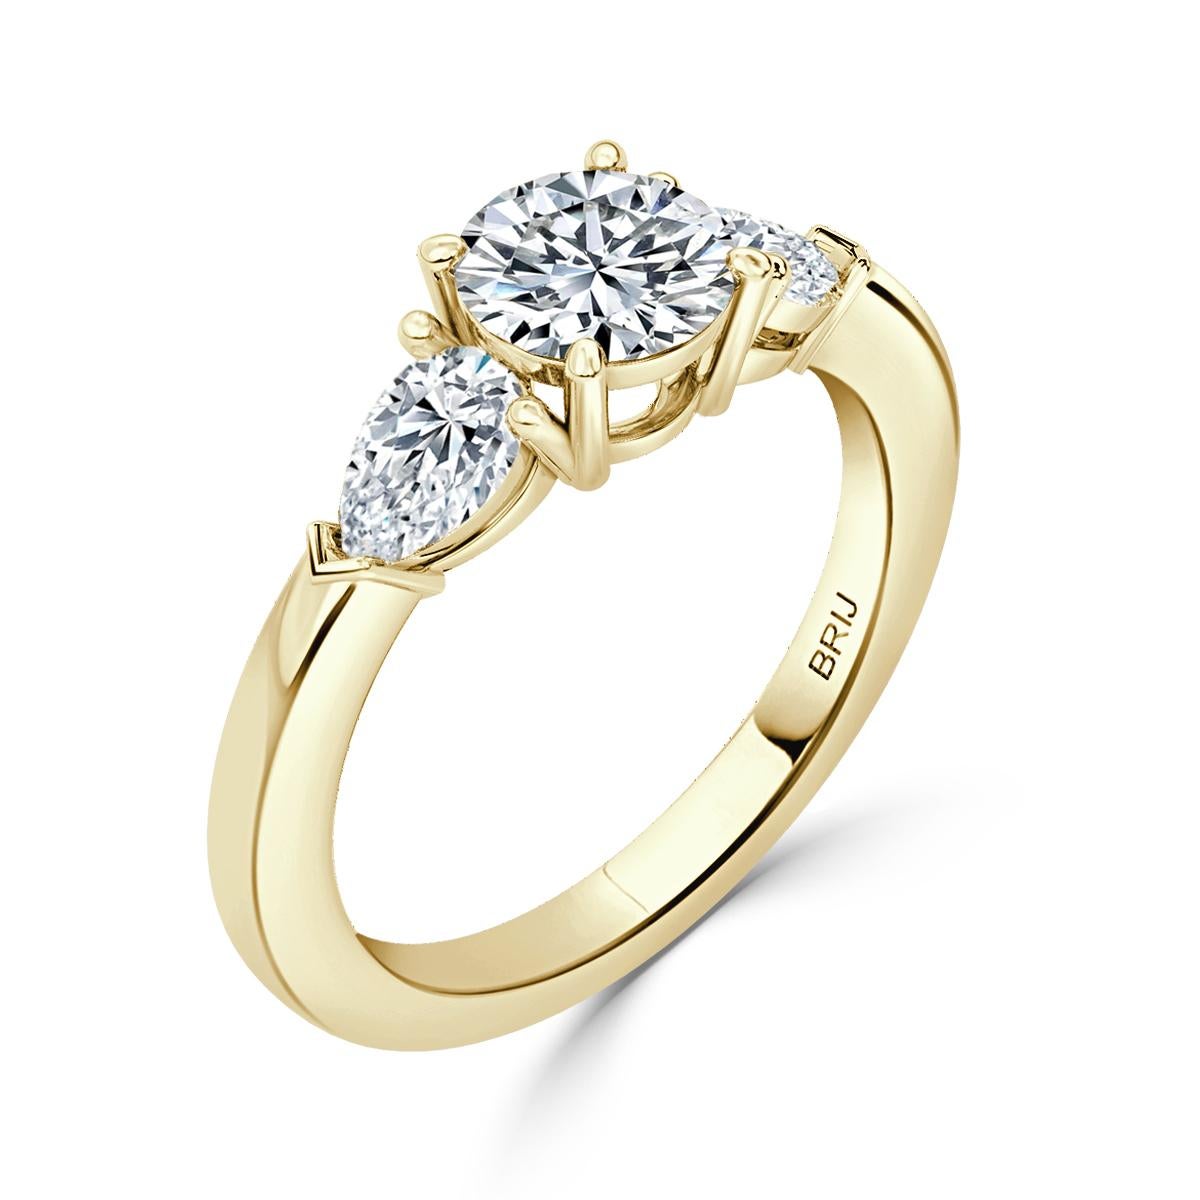 Simple, Classic 3 Stone Diamond engagement ring. Accented with 2 Pear cut GIA Diamonds along the shank  in a 18k Yellow Gold setting. 
GIA certified round center stone 0.80 CT
Side Pear Carat weight 0.60 CT

GIA Certified Diamond Details
Weight: